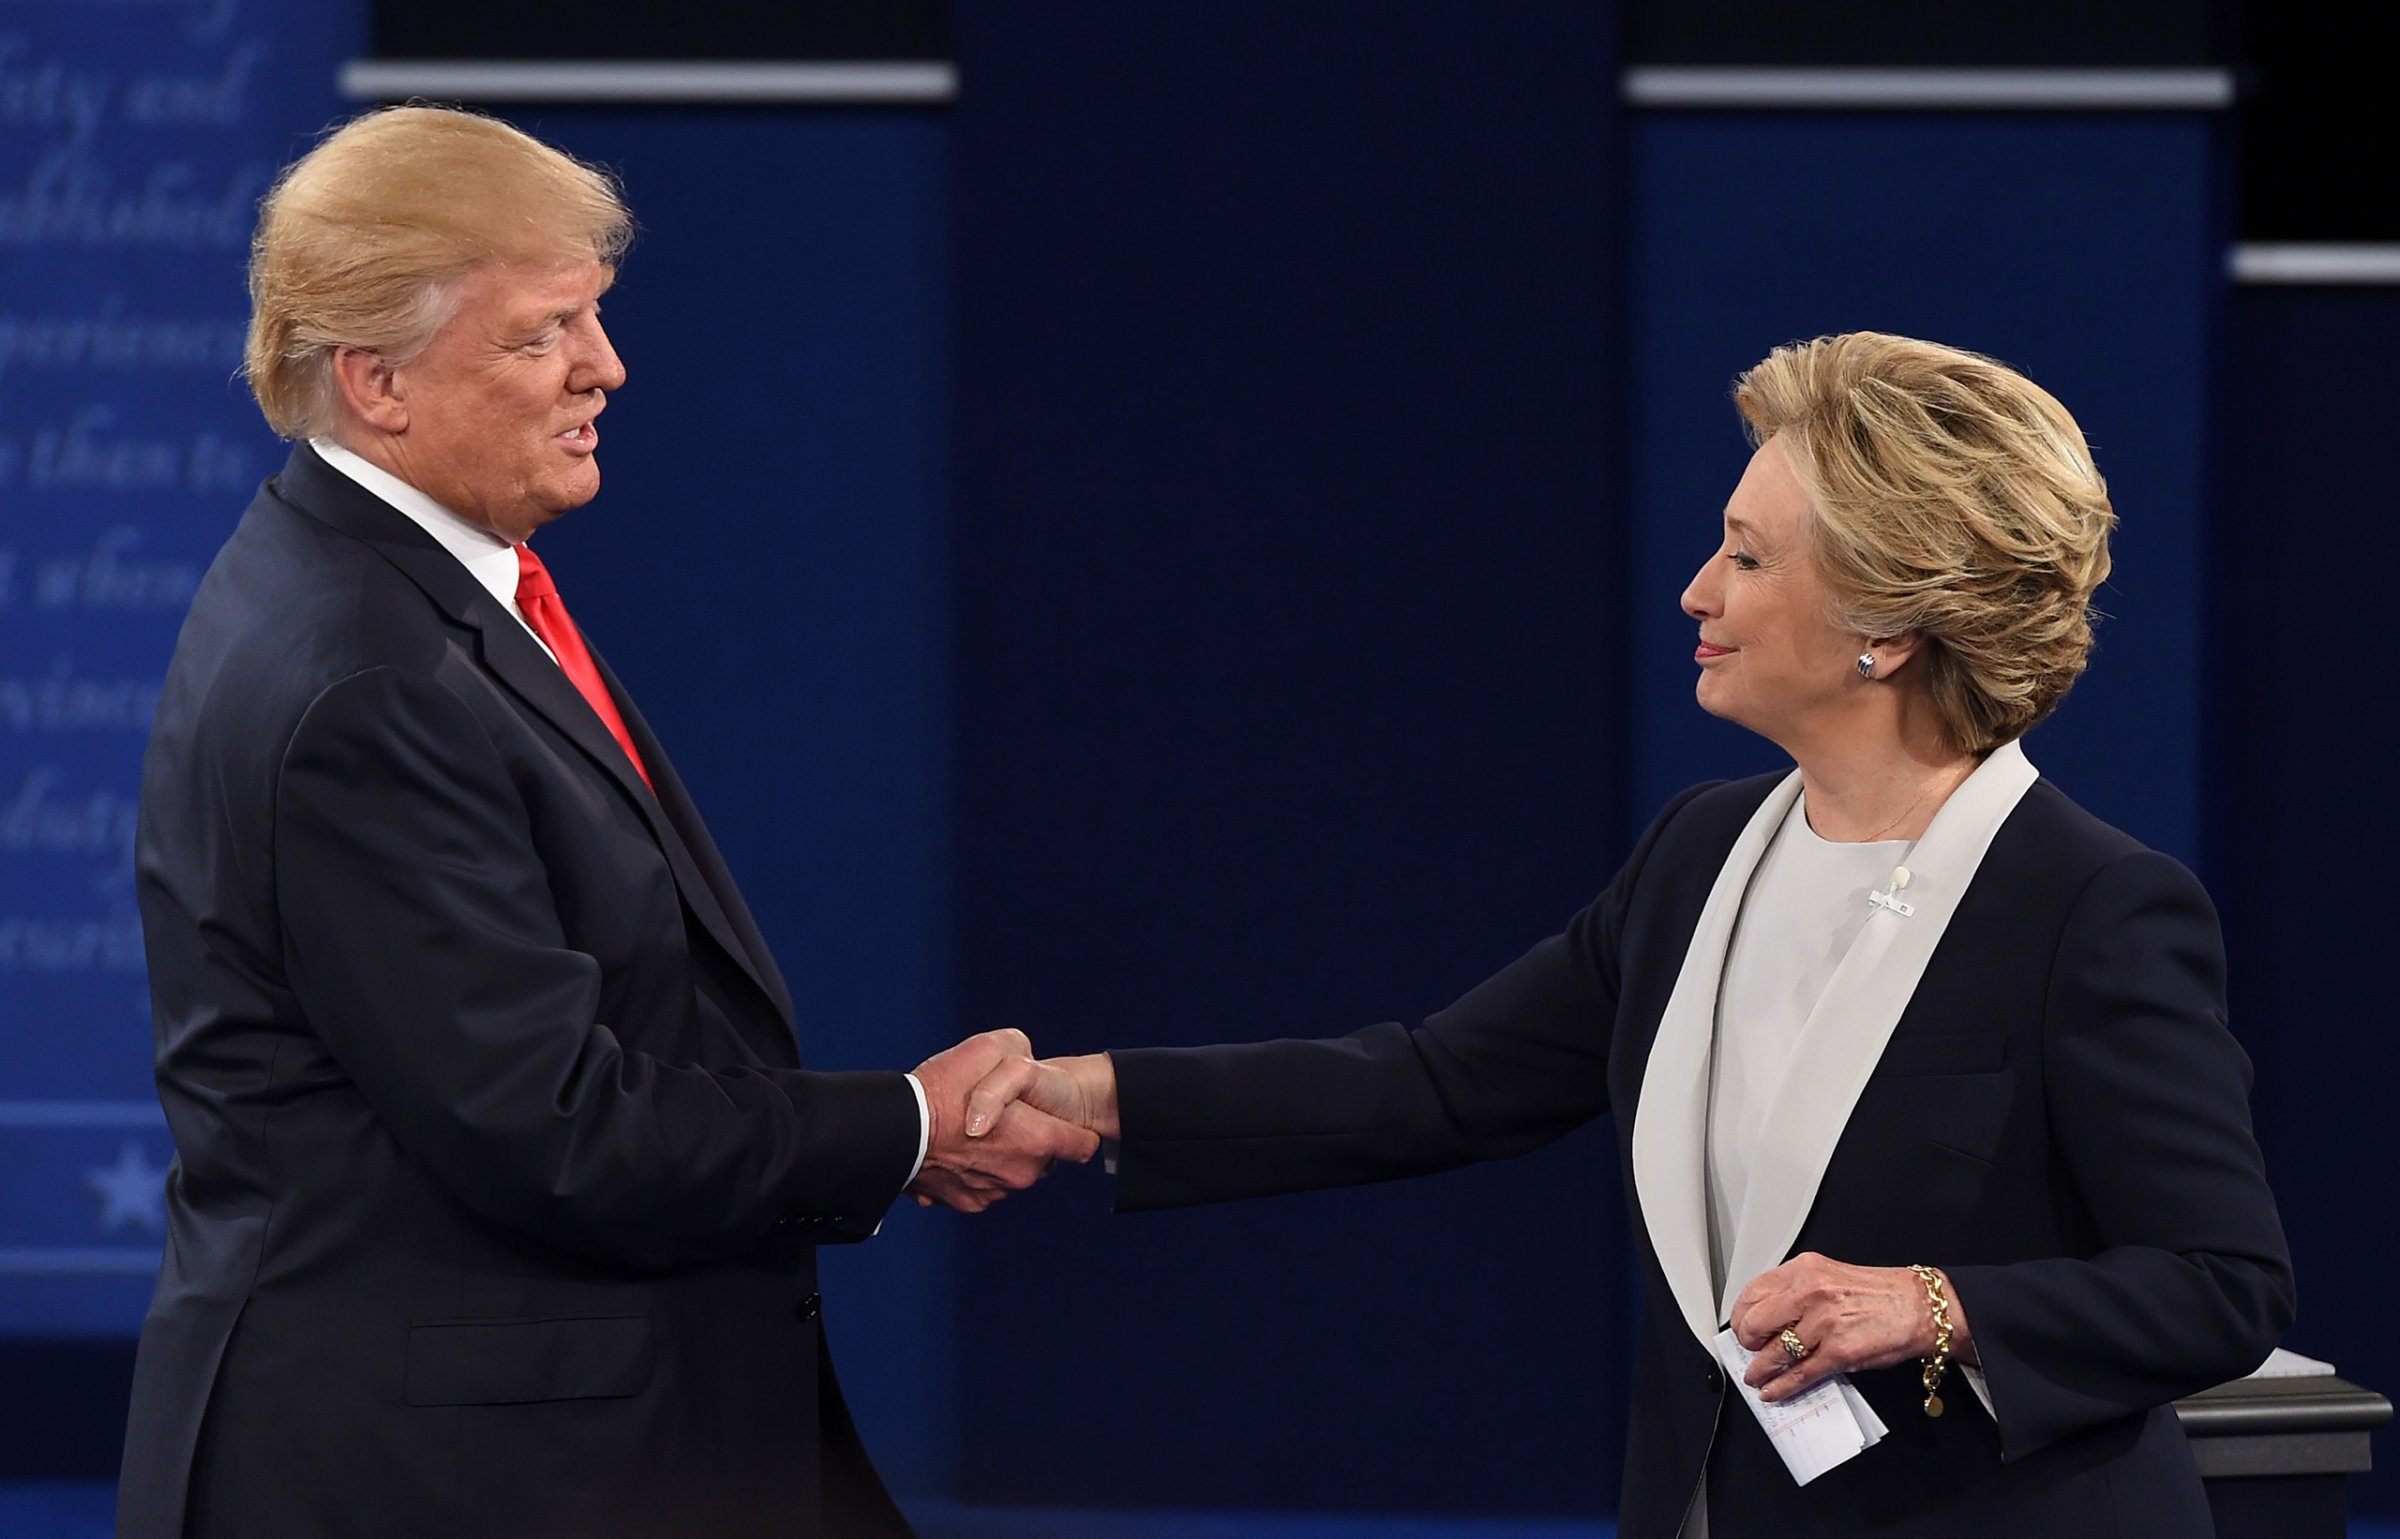 Hillary Clinton and Donald Trump shake hands after the second presidential debate at Washington University in St. Louis, Missouri, on Oct. 9, 2016.